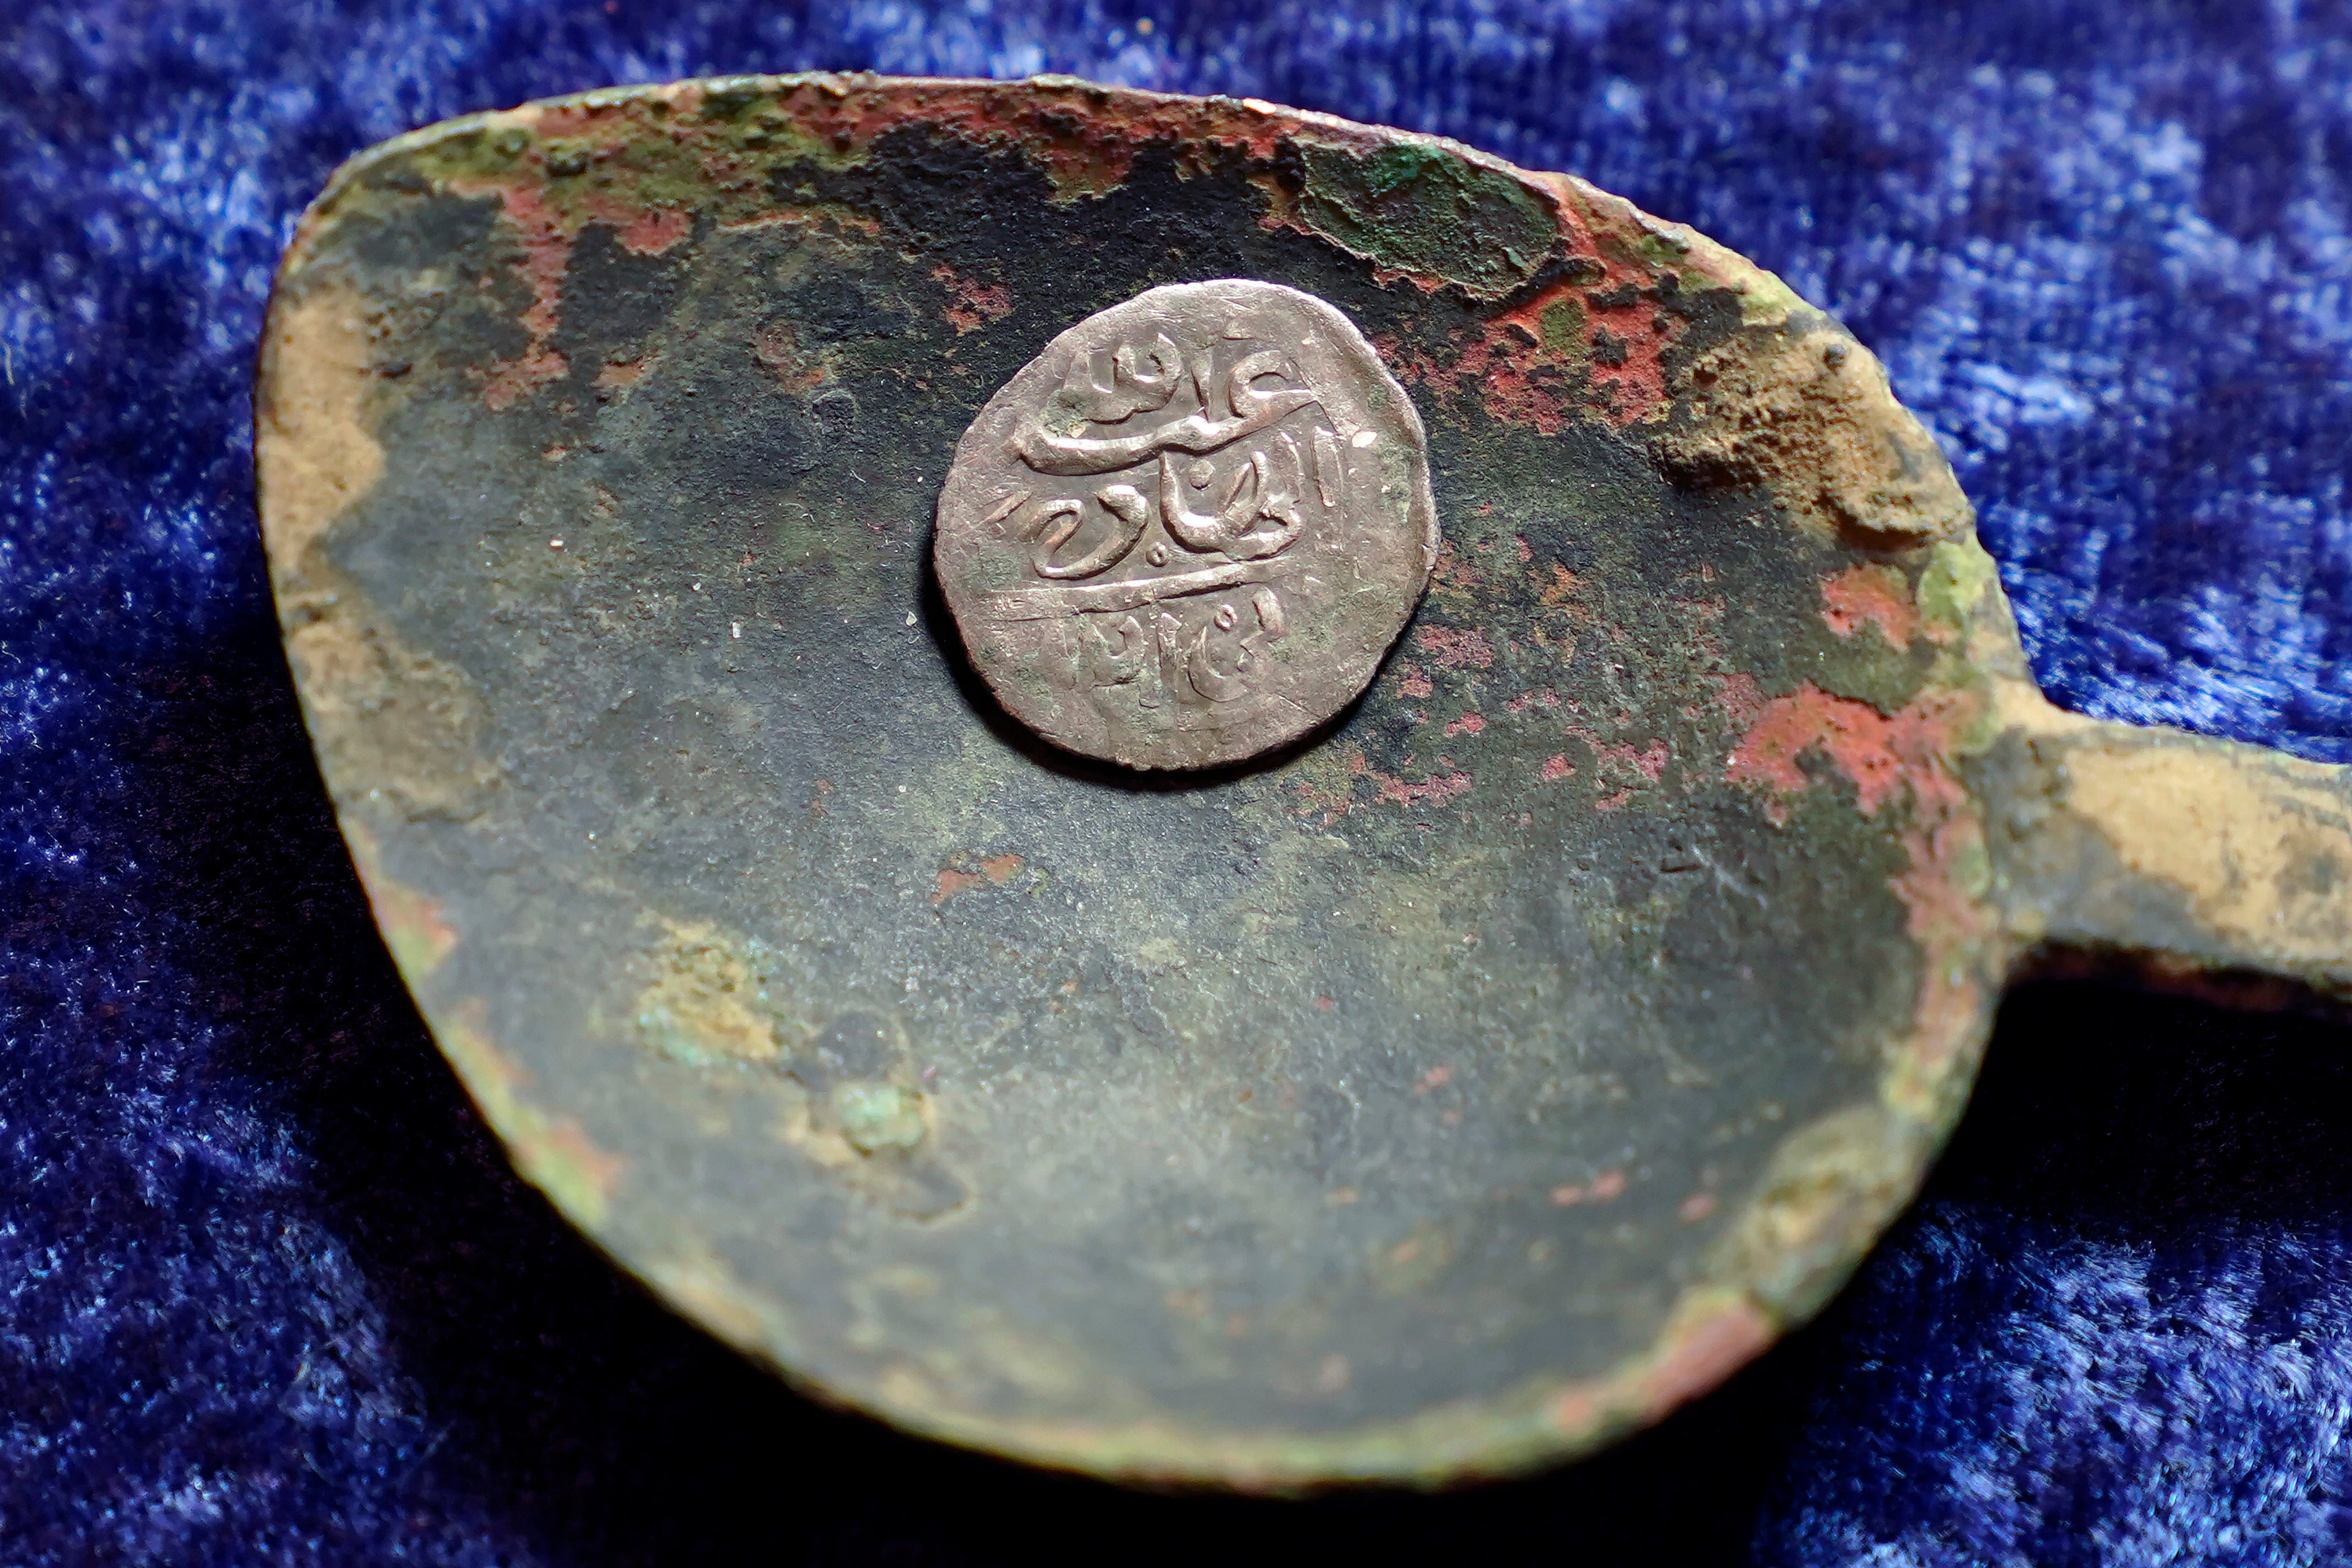 A 17th century Arabian silver coin that research shows was struck in 1693 in Yemen, rests in a 17th century brass spoon on a table, in Warwick, R.I., Thursday, March 11, 2021.